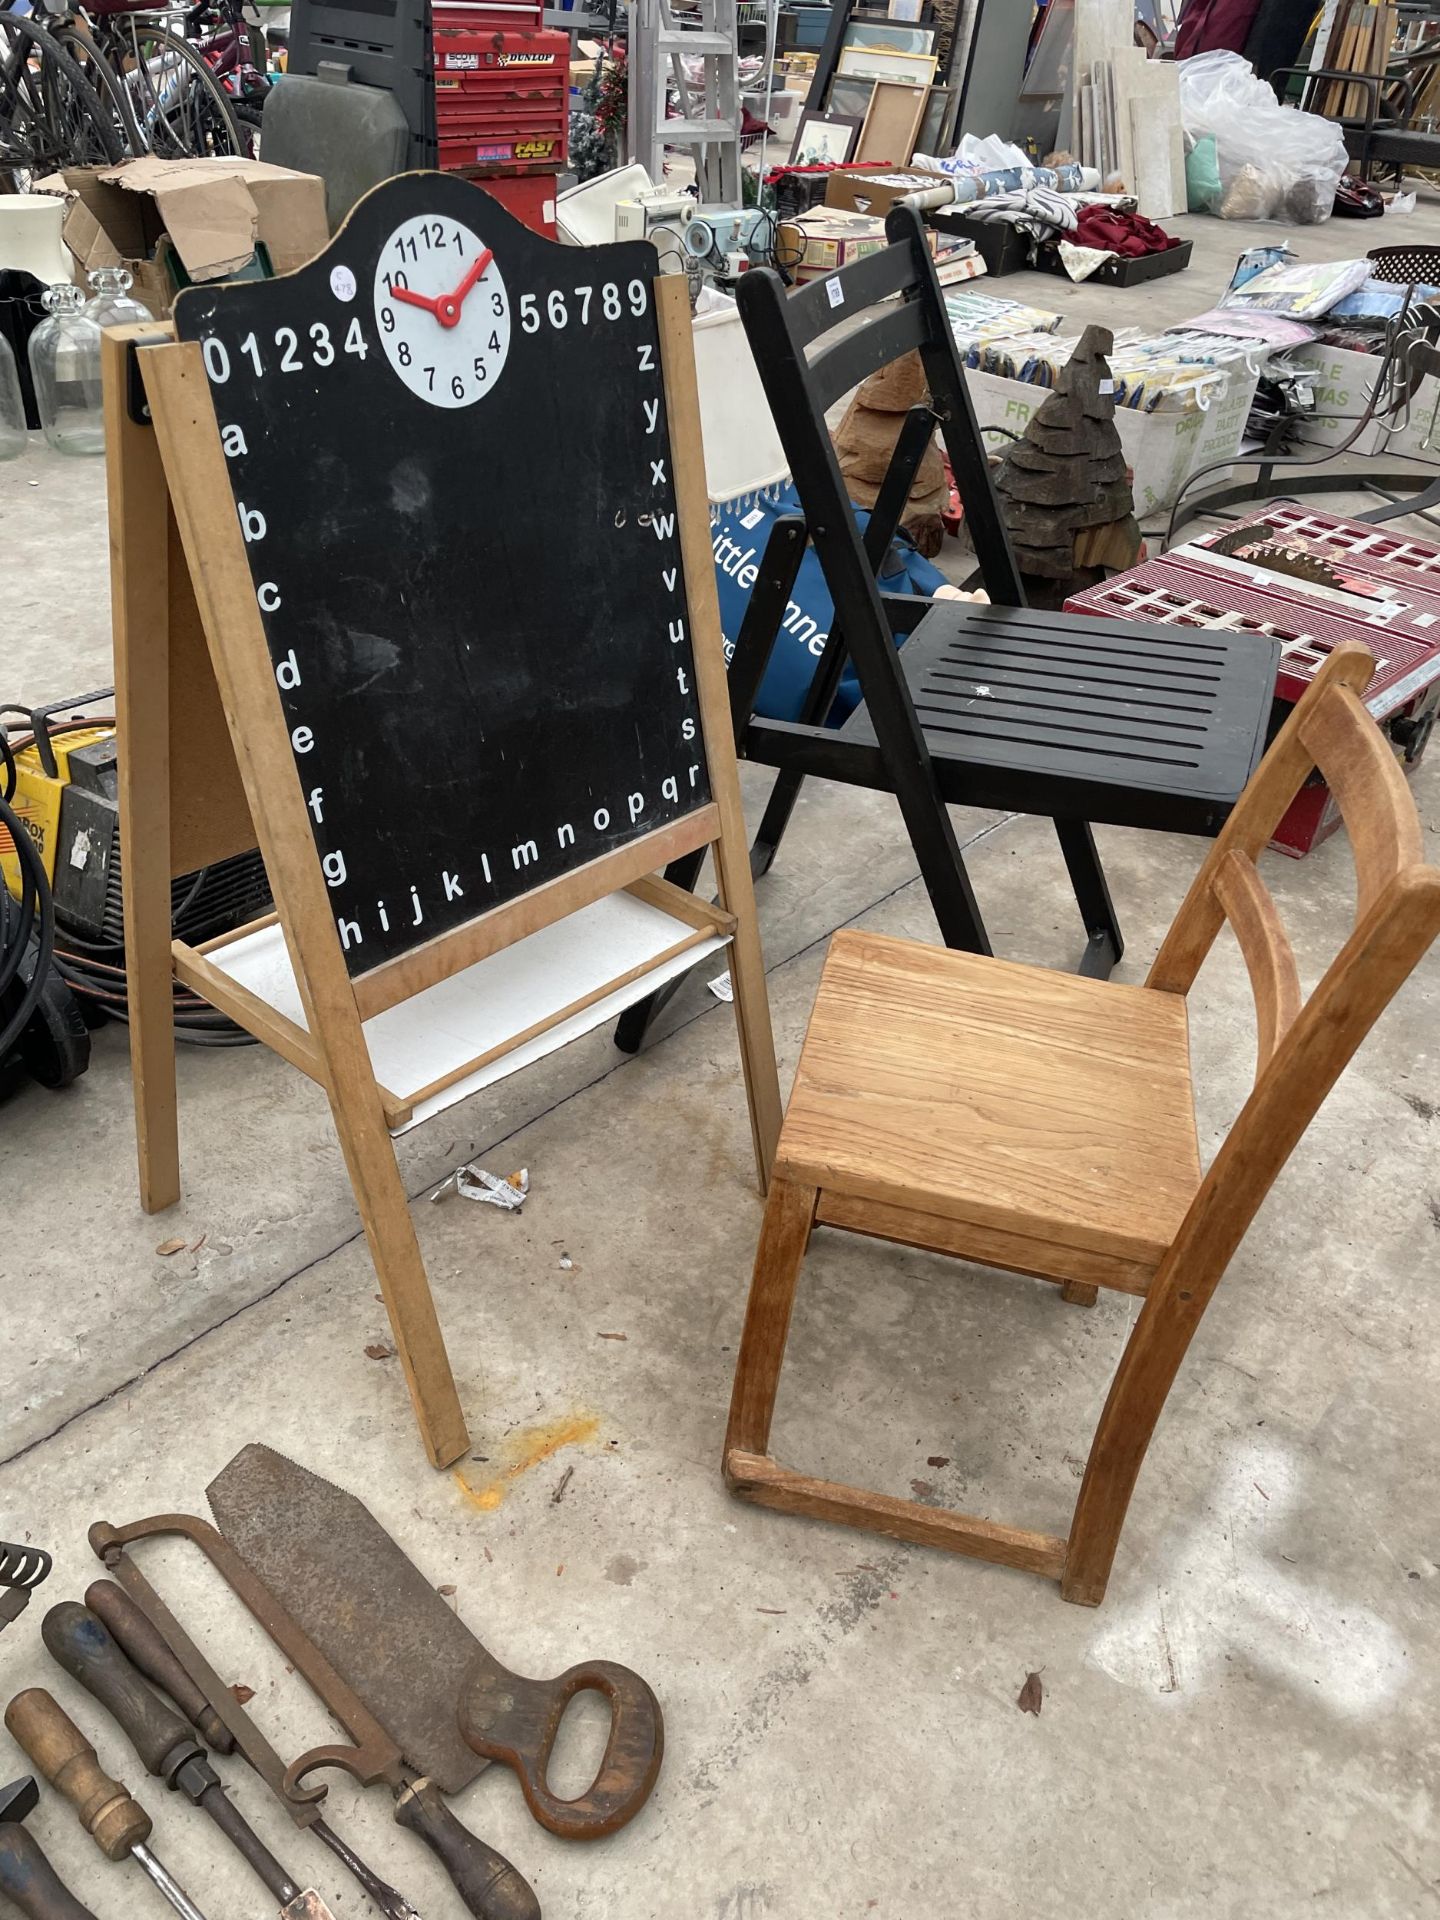 A FOLDING WOODEN CHAIR, A CHILDS CHALK BOARD AND A CHILDS CHAIRS - Bild 2 aus 2